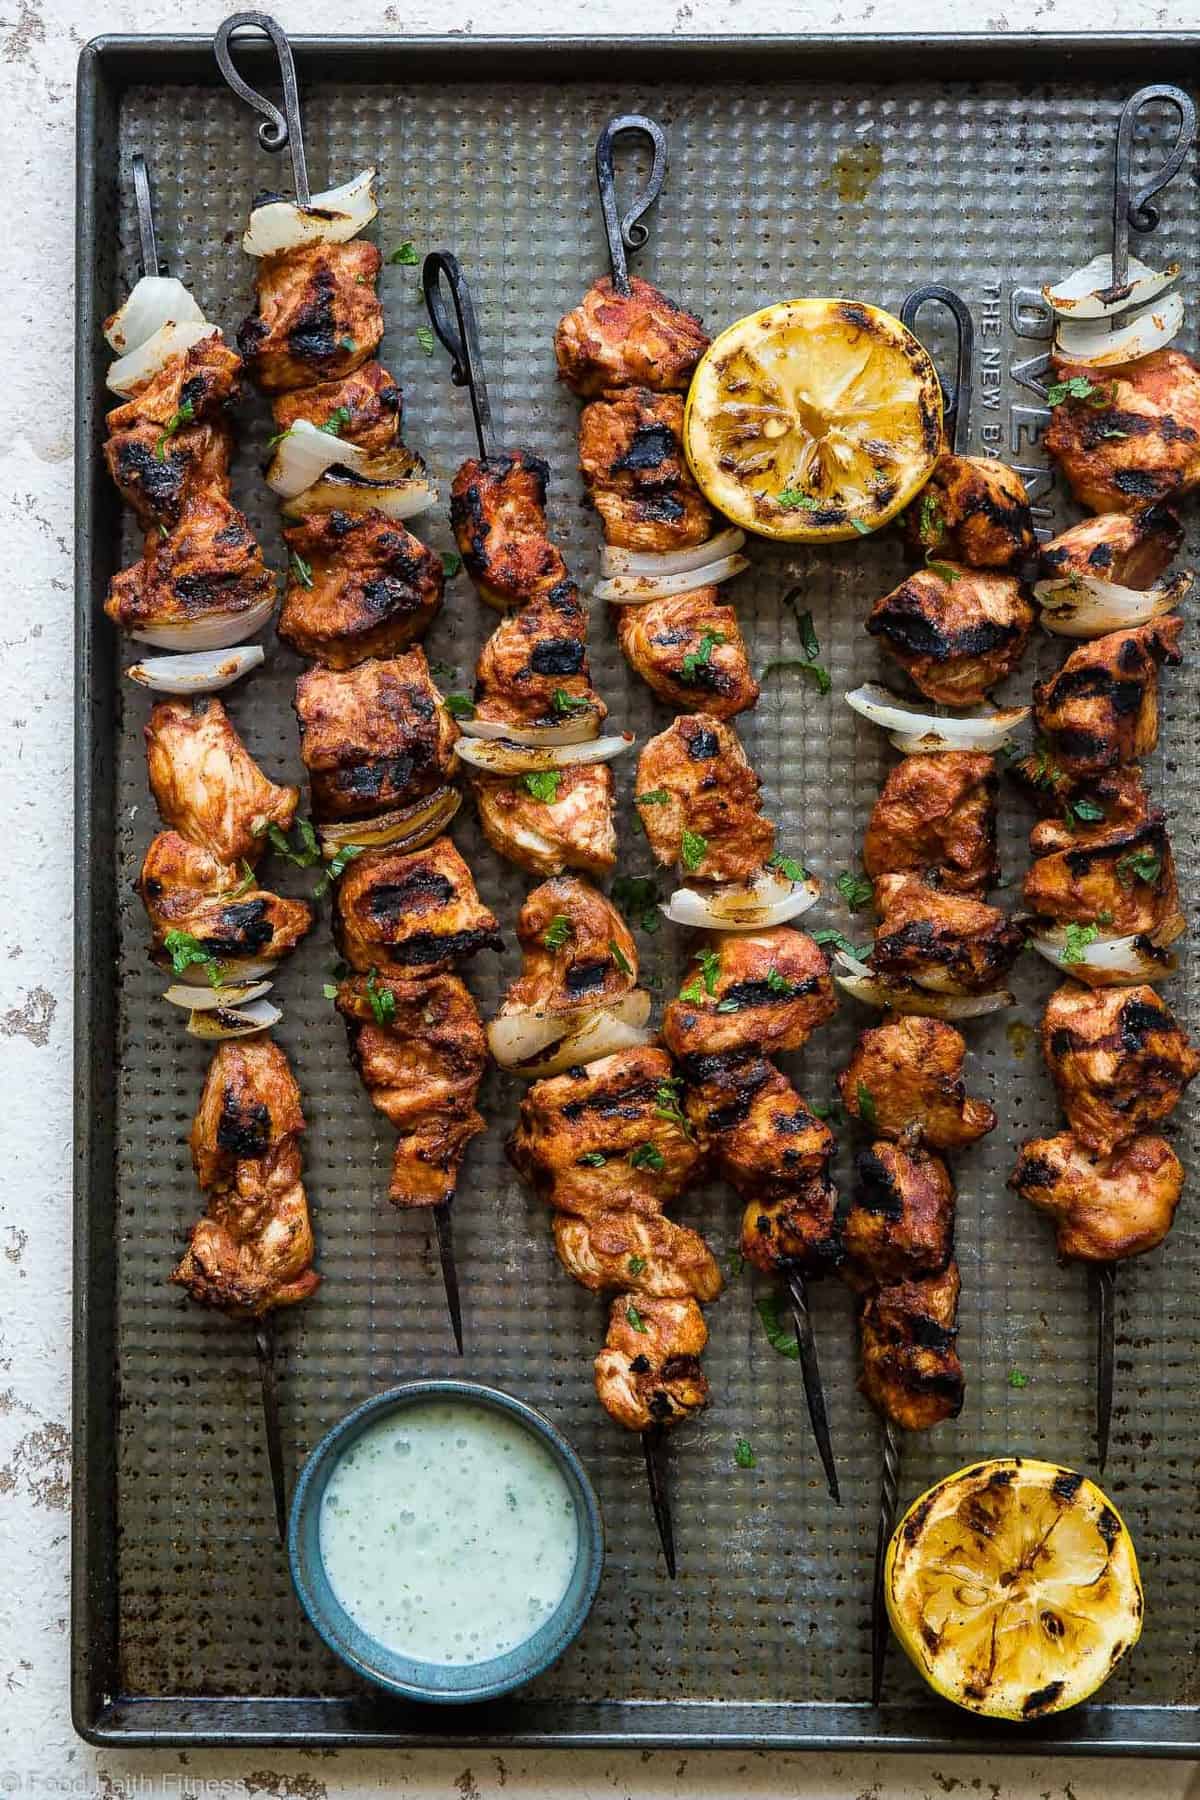 Grilled Moroccan Chicken Kebabs - These quick and easy, low carb Grilled Moroccan Chicken skewers are complete with a healthy, high protein yogurt mint sauce! Gluten free, only 1 Weight Watchers Freestlye point and SO delicious! | #Foodfaithfitness | #Lowcarb #WeightWatchers #Glutenfree #Healthy #Grilling